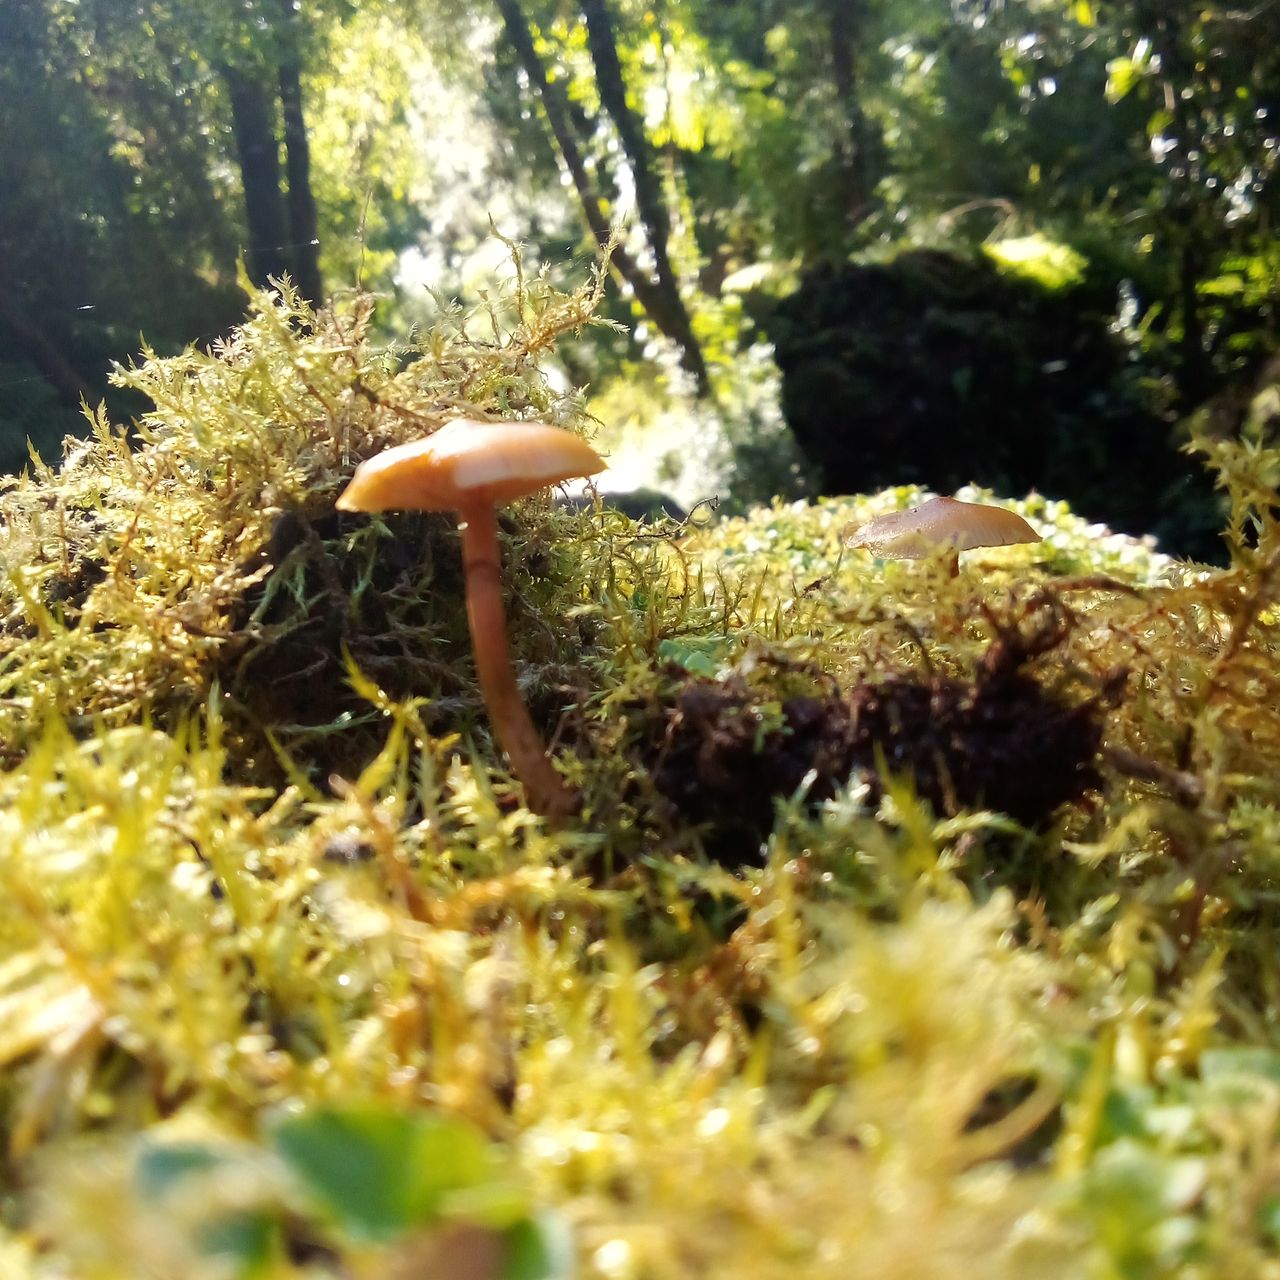 plant, tree, nature, forest, fungus, mushroom, growth, woodland, natural environment, autumn, selective focus, day, land, sunlight, beauty in nature, moss, outdoors, one person, flower, vegetable, leaf, grass, wildlife, green, food